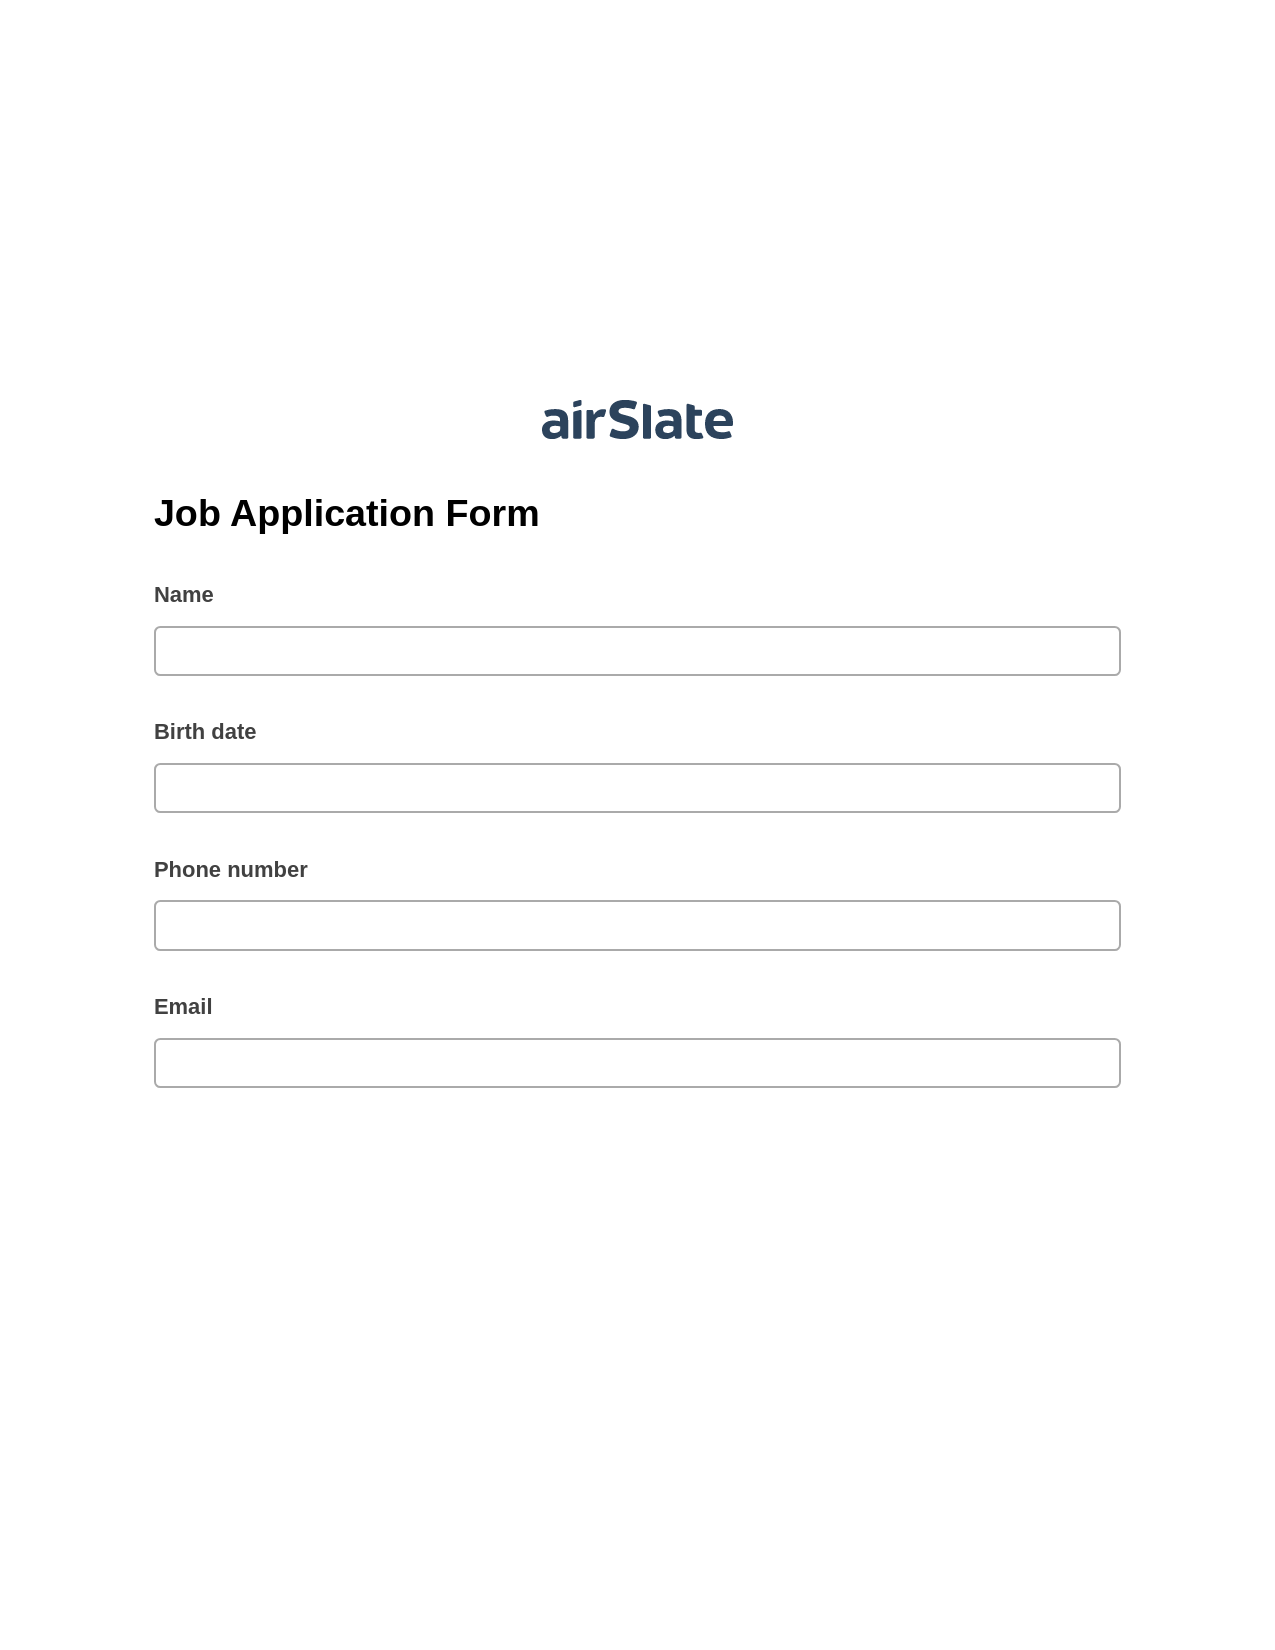 Multirole Job Application Form Pre-fill from CSV File Bot, Send a Slate to Salesforce Contact Bot, Export to Smartsheet